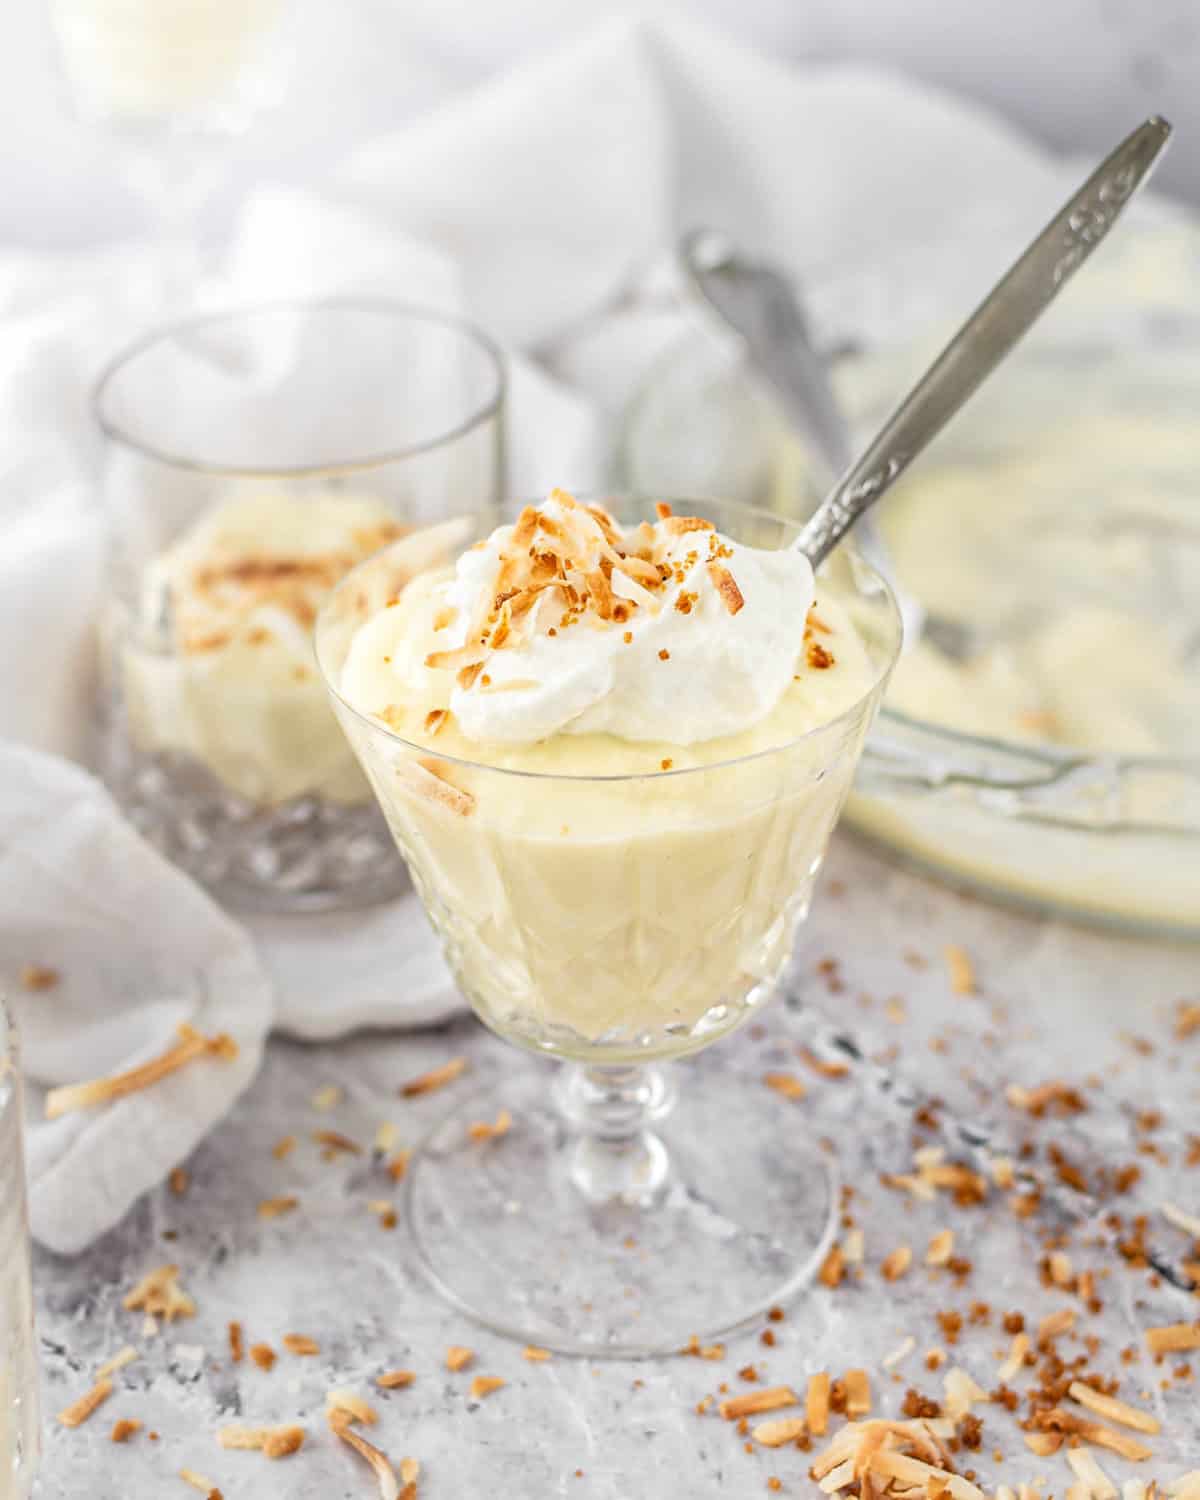 Coconut pudding in a glass with a spoon.